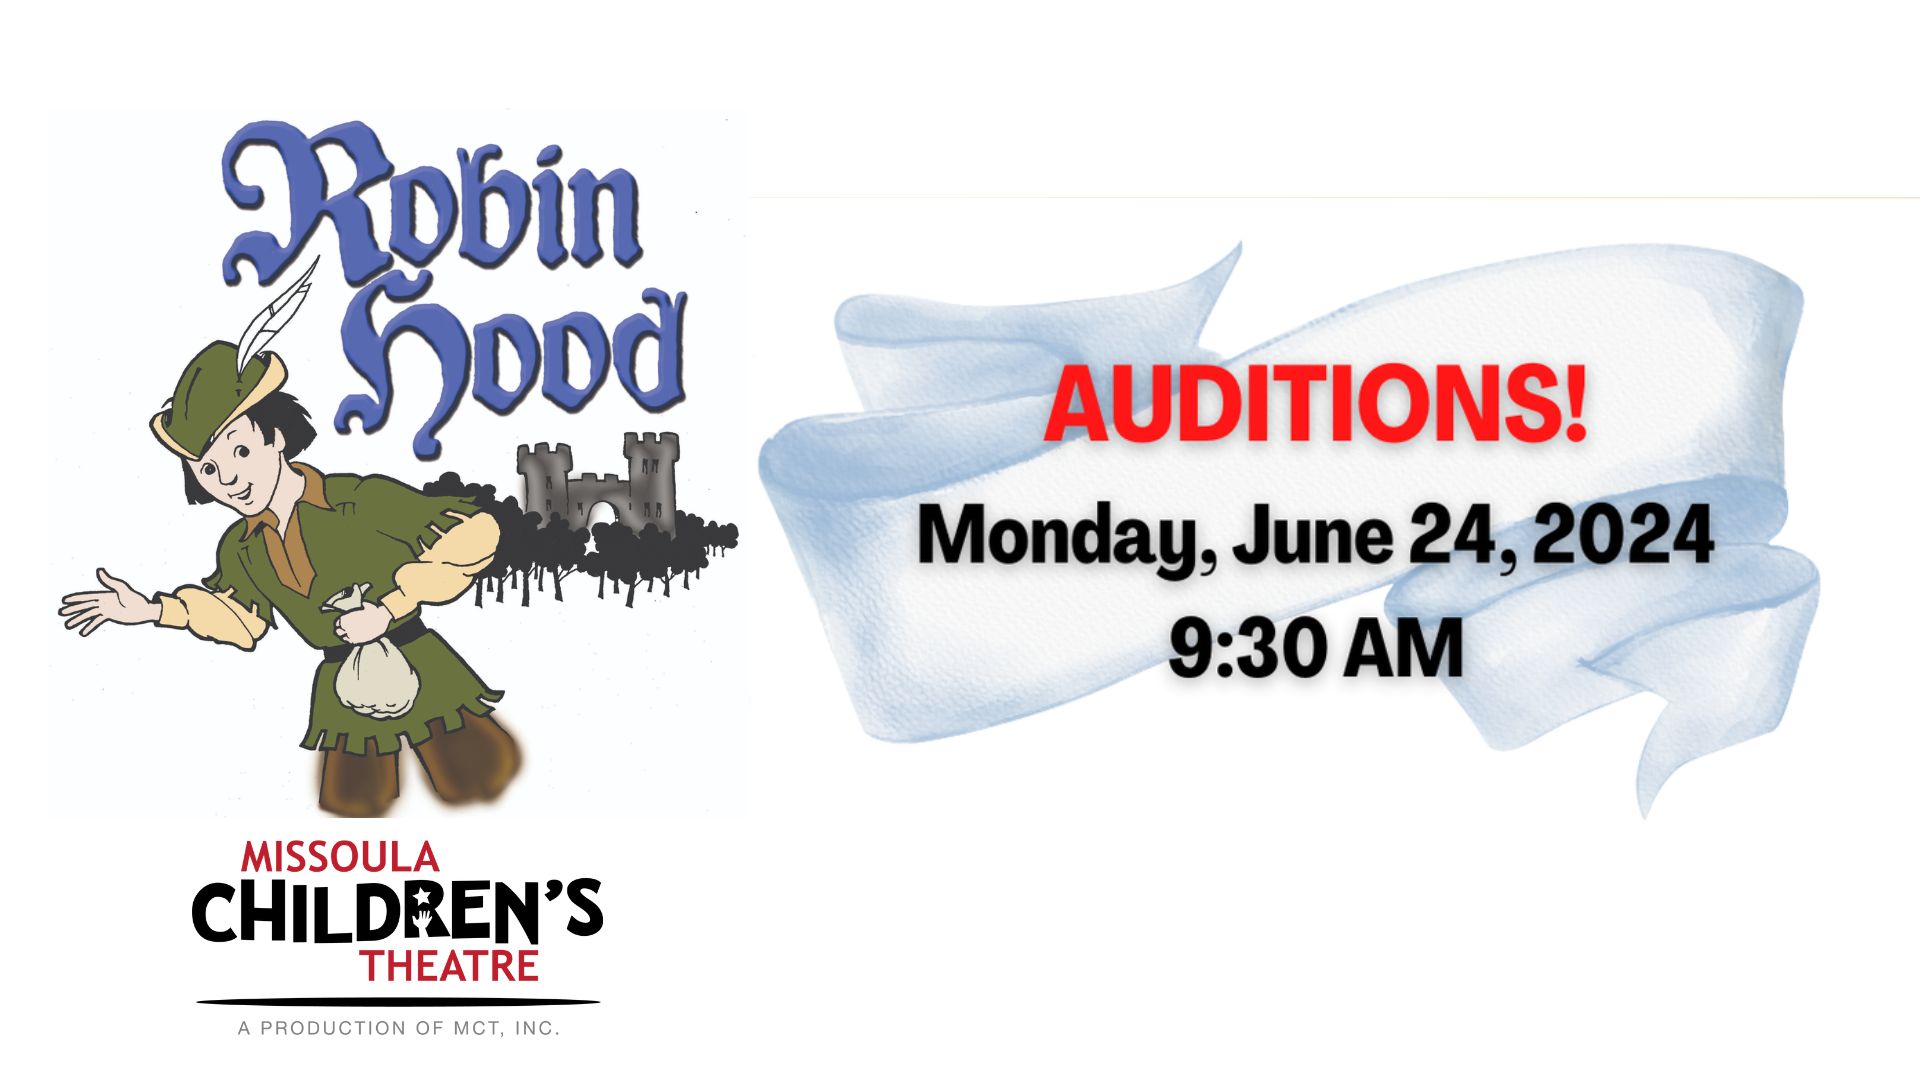 Robin Hood- Columbia Theatre and MCT Summer Theatre Camp, Longview, Washington, United States